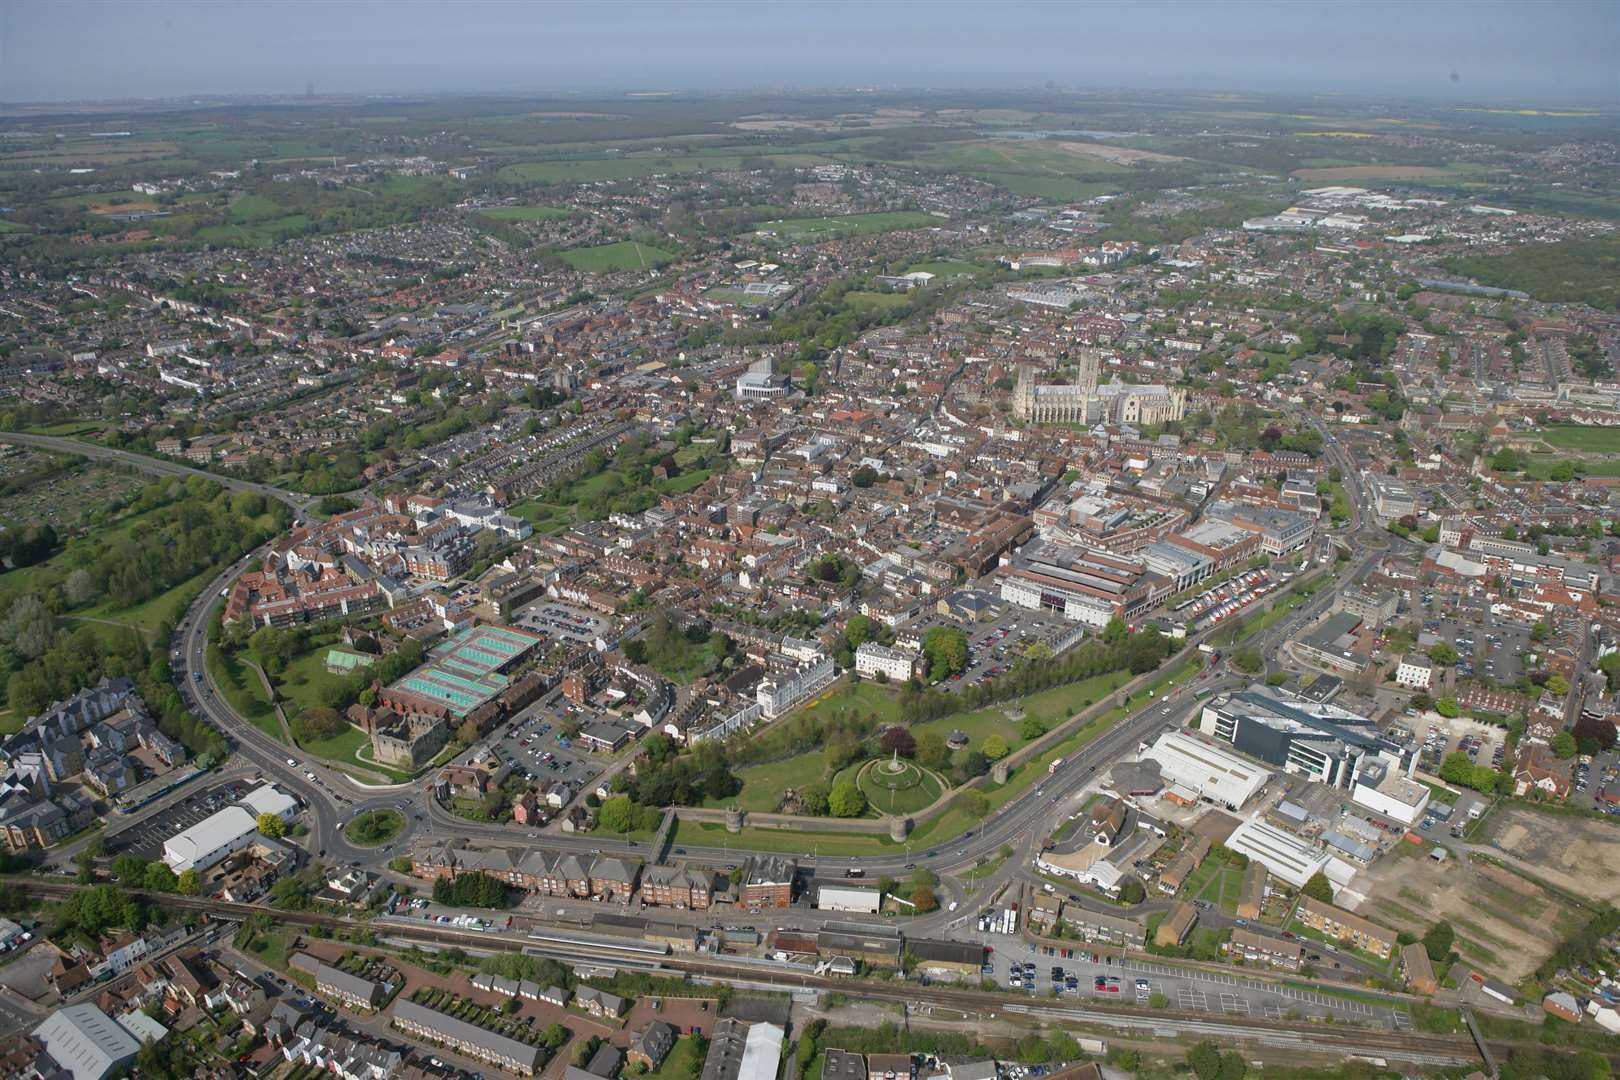 With several colleges and universities, Canterbury has a large population of young people